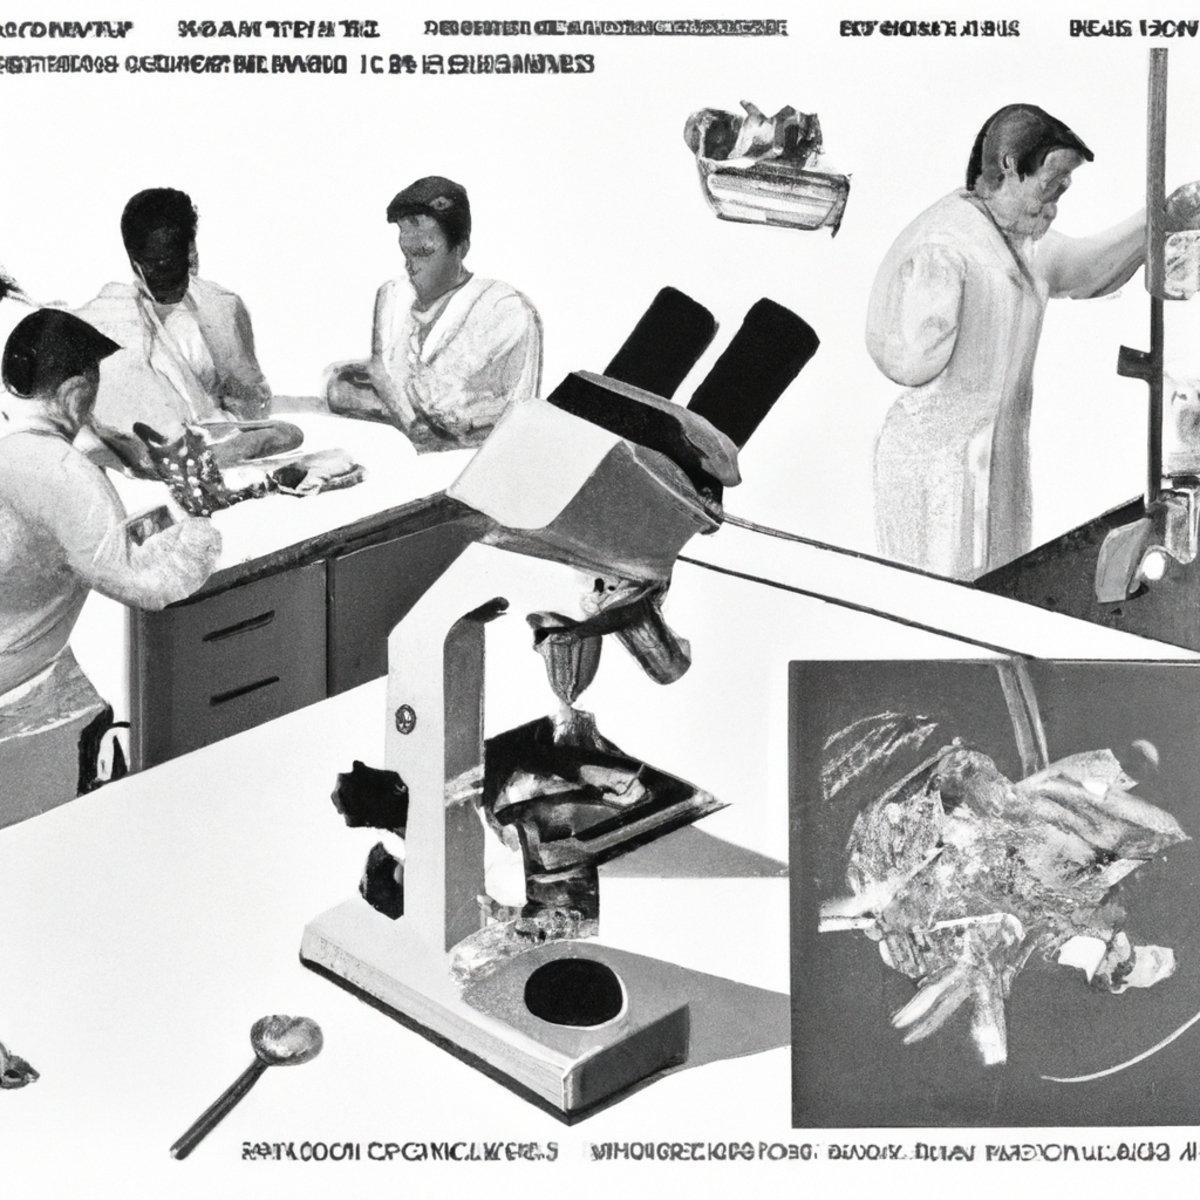 Lab bench with scientific instruments, microscope, brain tissue sample, notebook of observations. Conveys scientific rigor in debunking Rasmussen's Encephalitis myths.